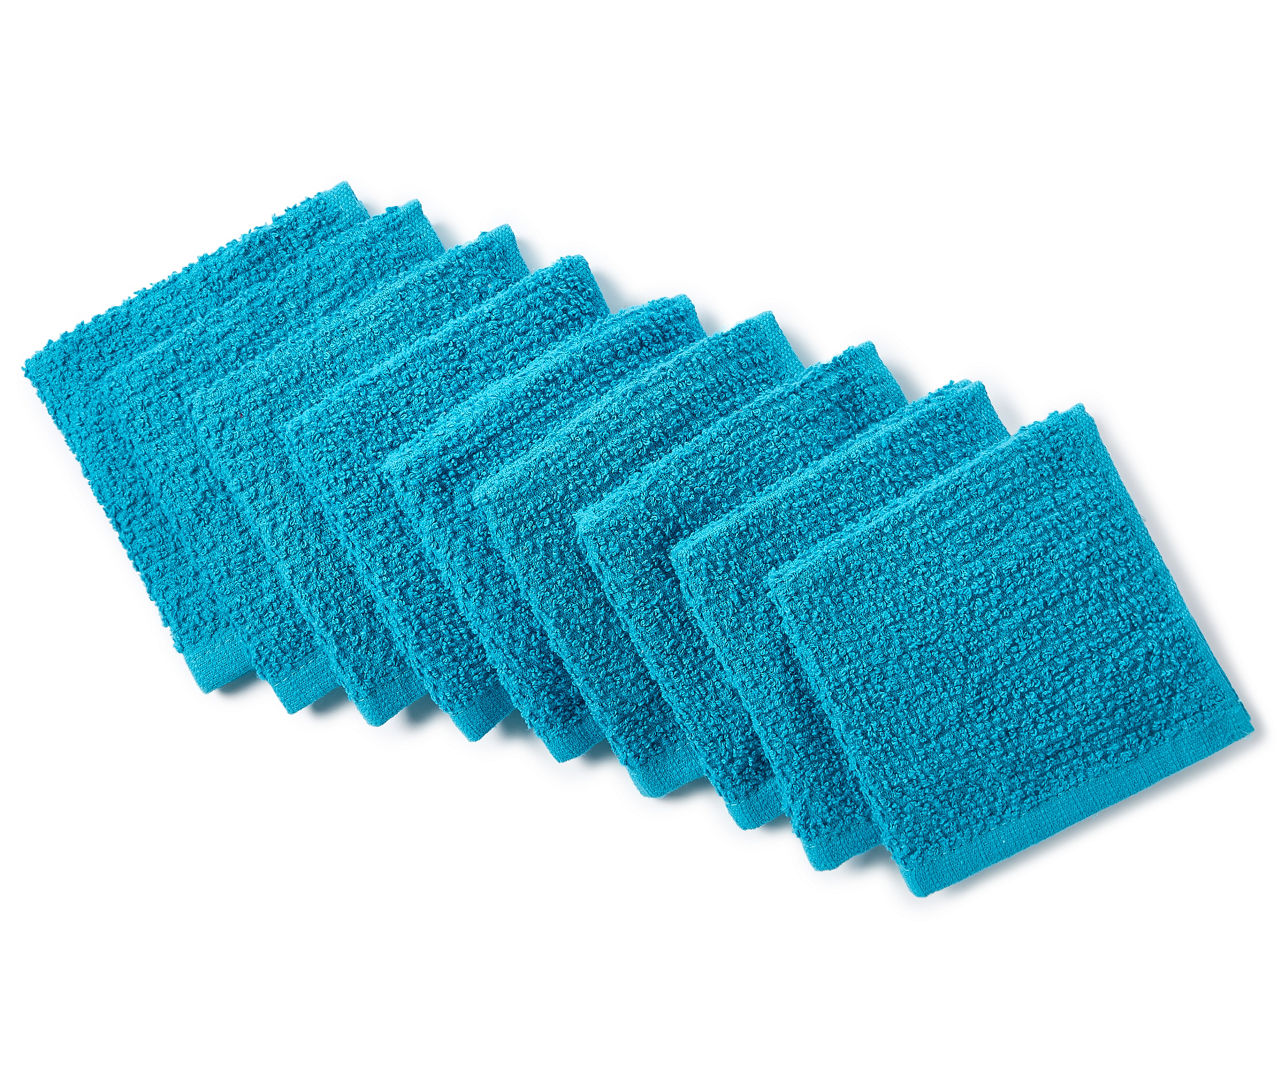 Just Home Wash Cloths, 9-Pack